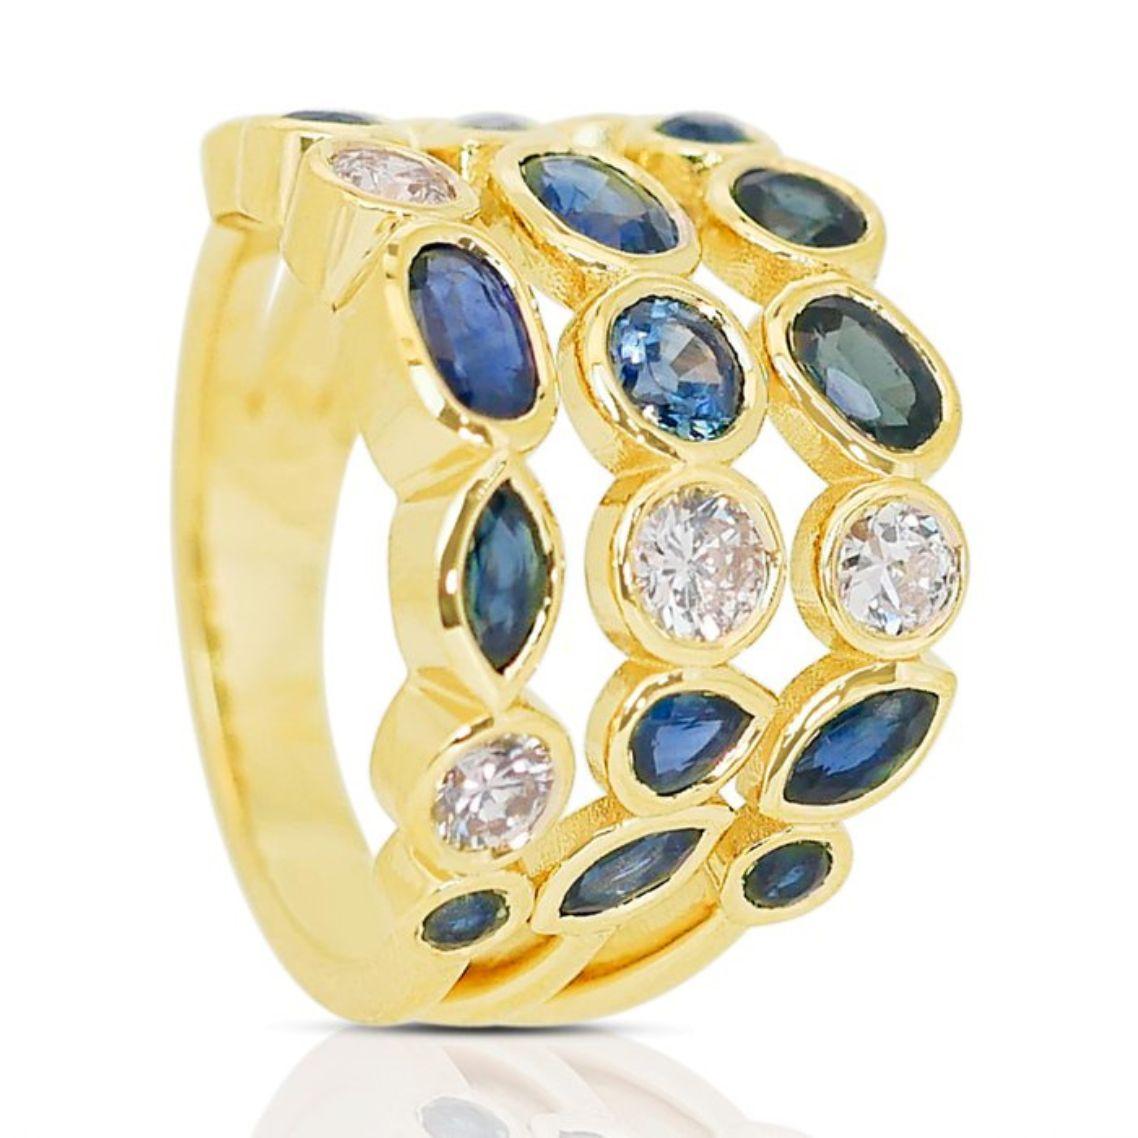 Round Cut Captivating 3.37ct Diamond and Sapphire Ring in 14K Yellow Gold